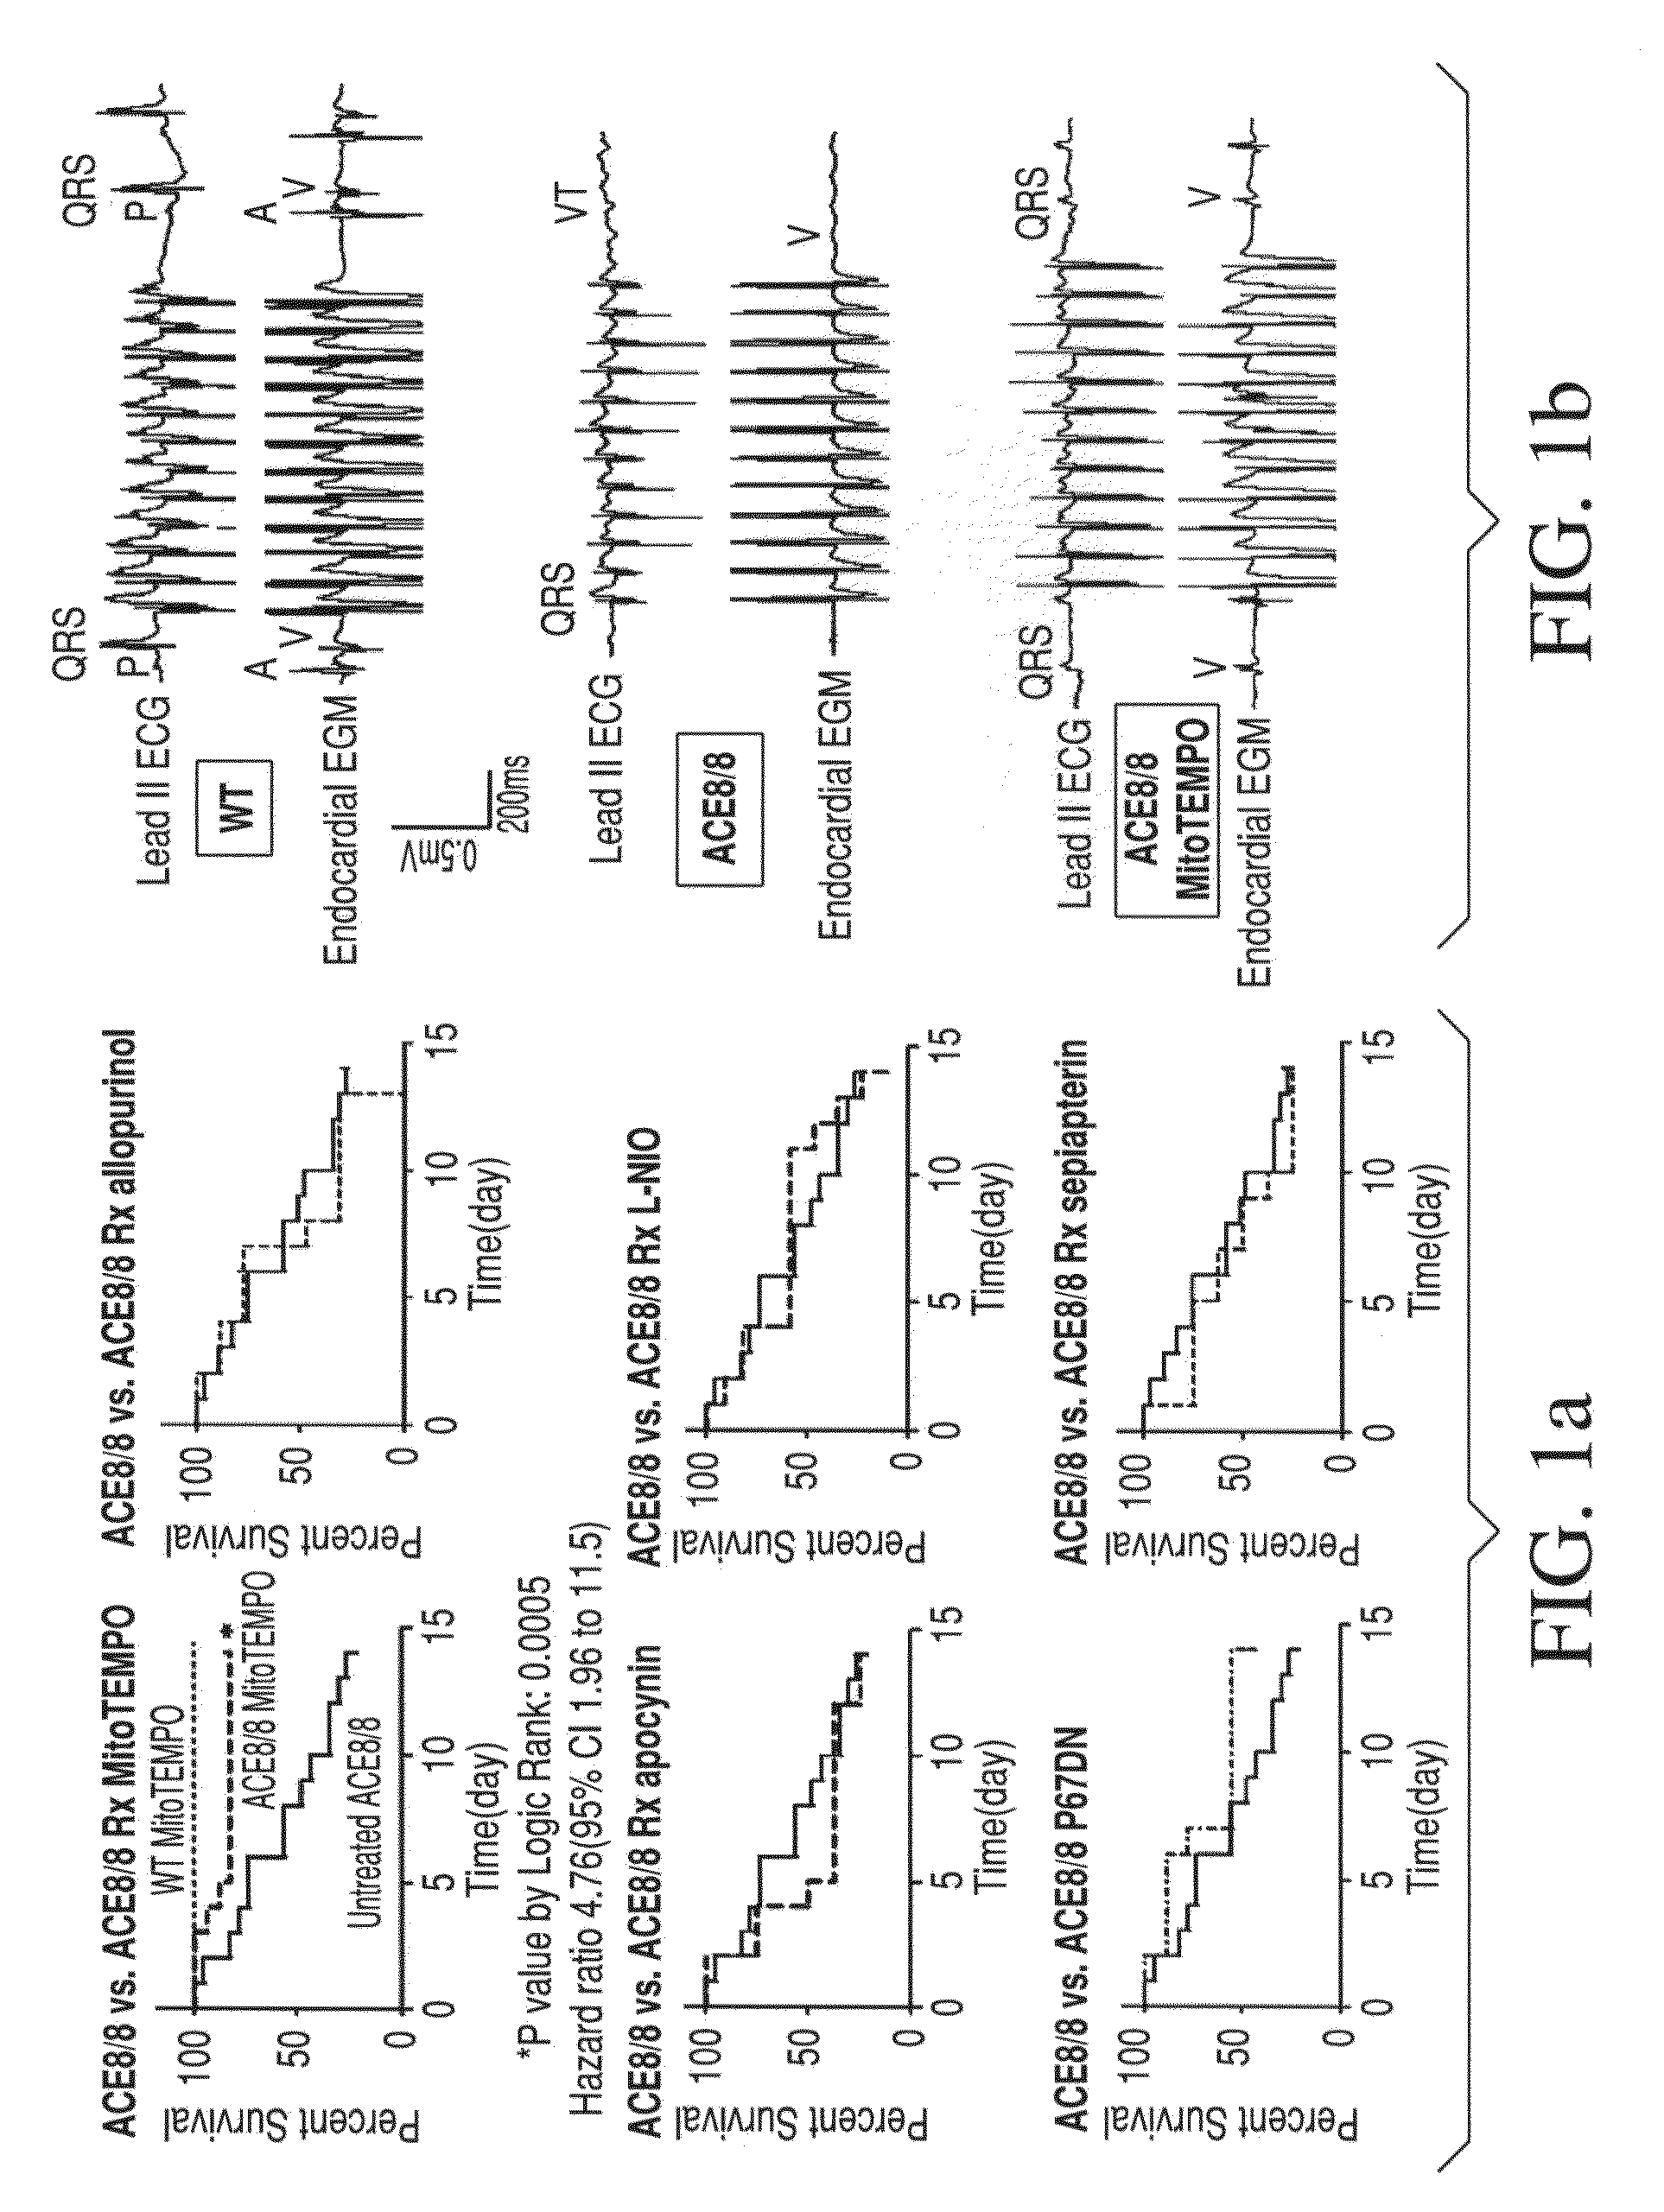 Method for modulating or controlling connexin 43(Cx43) level of a cell and reducing arrhythmic risk